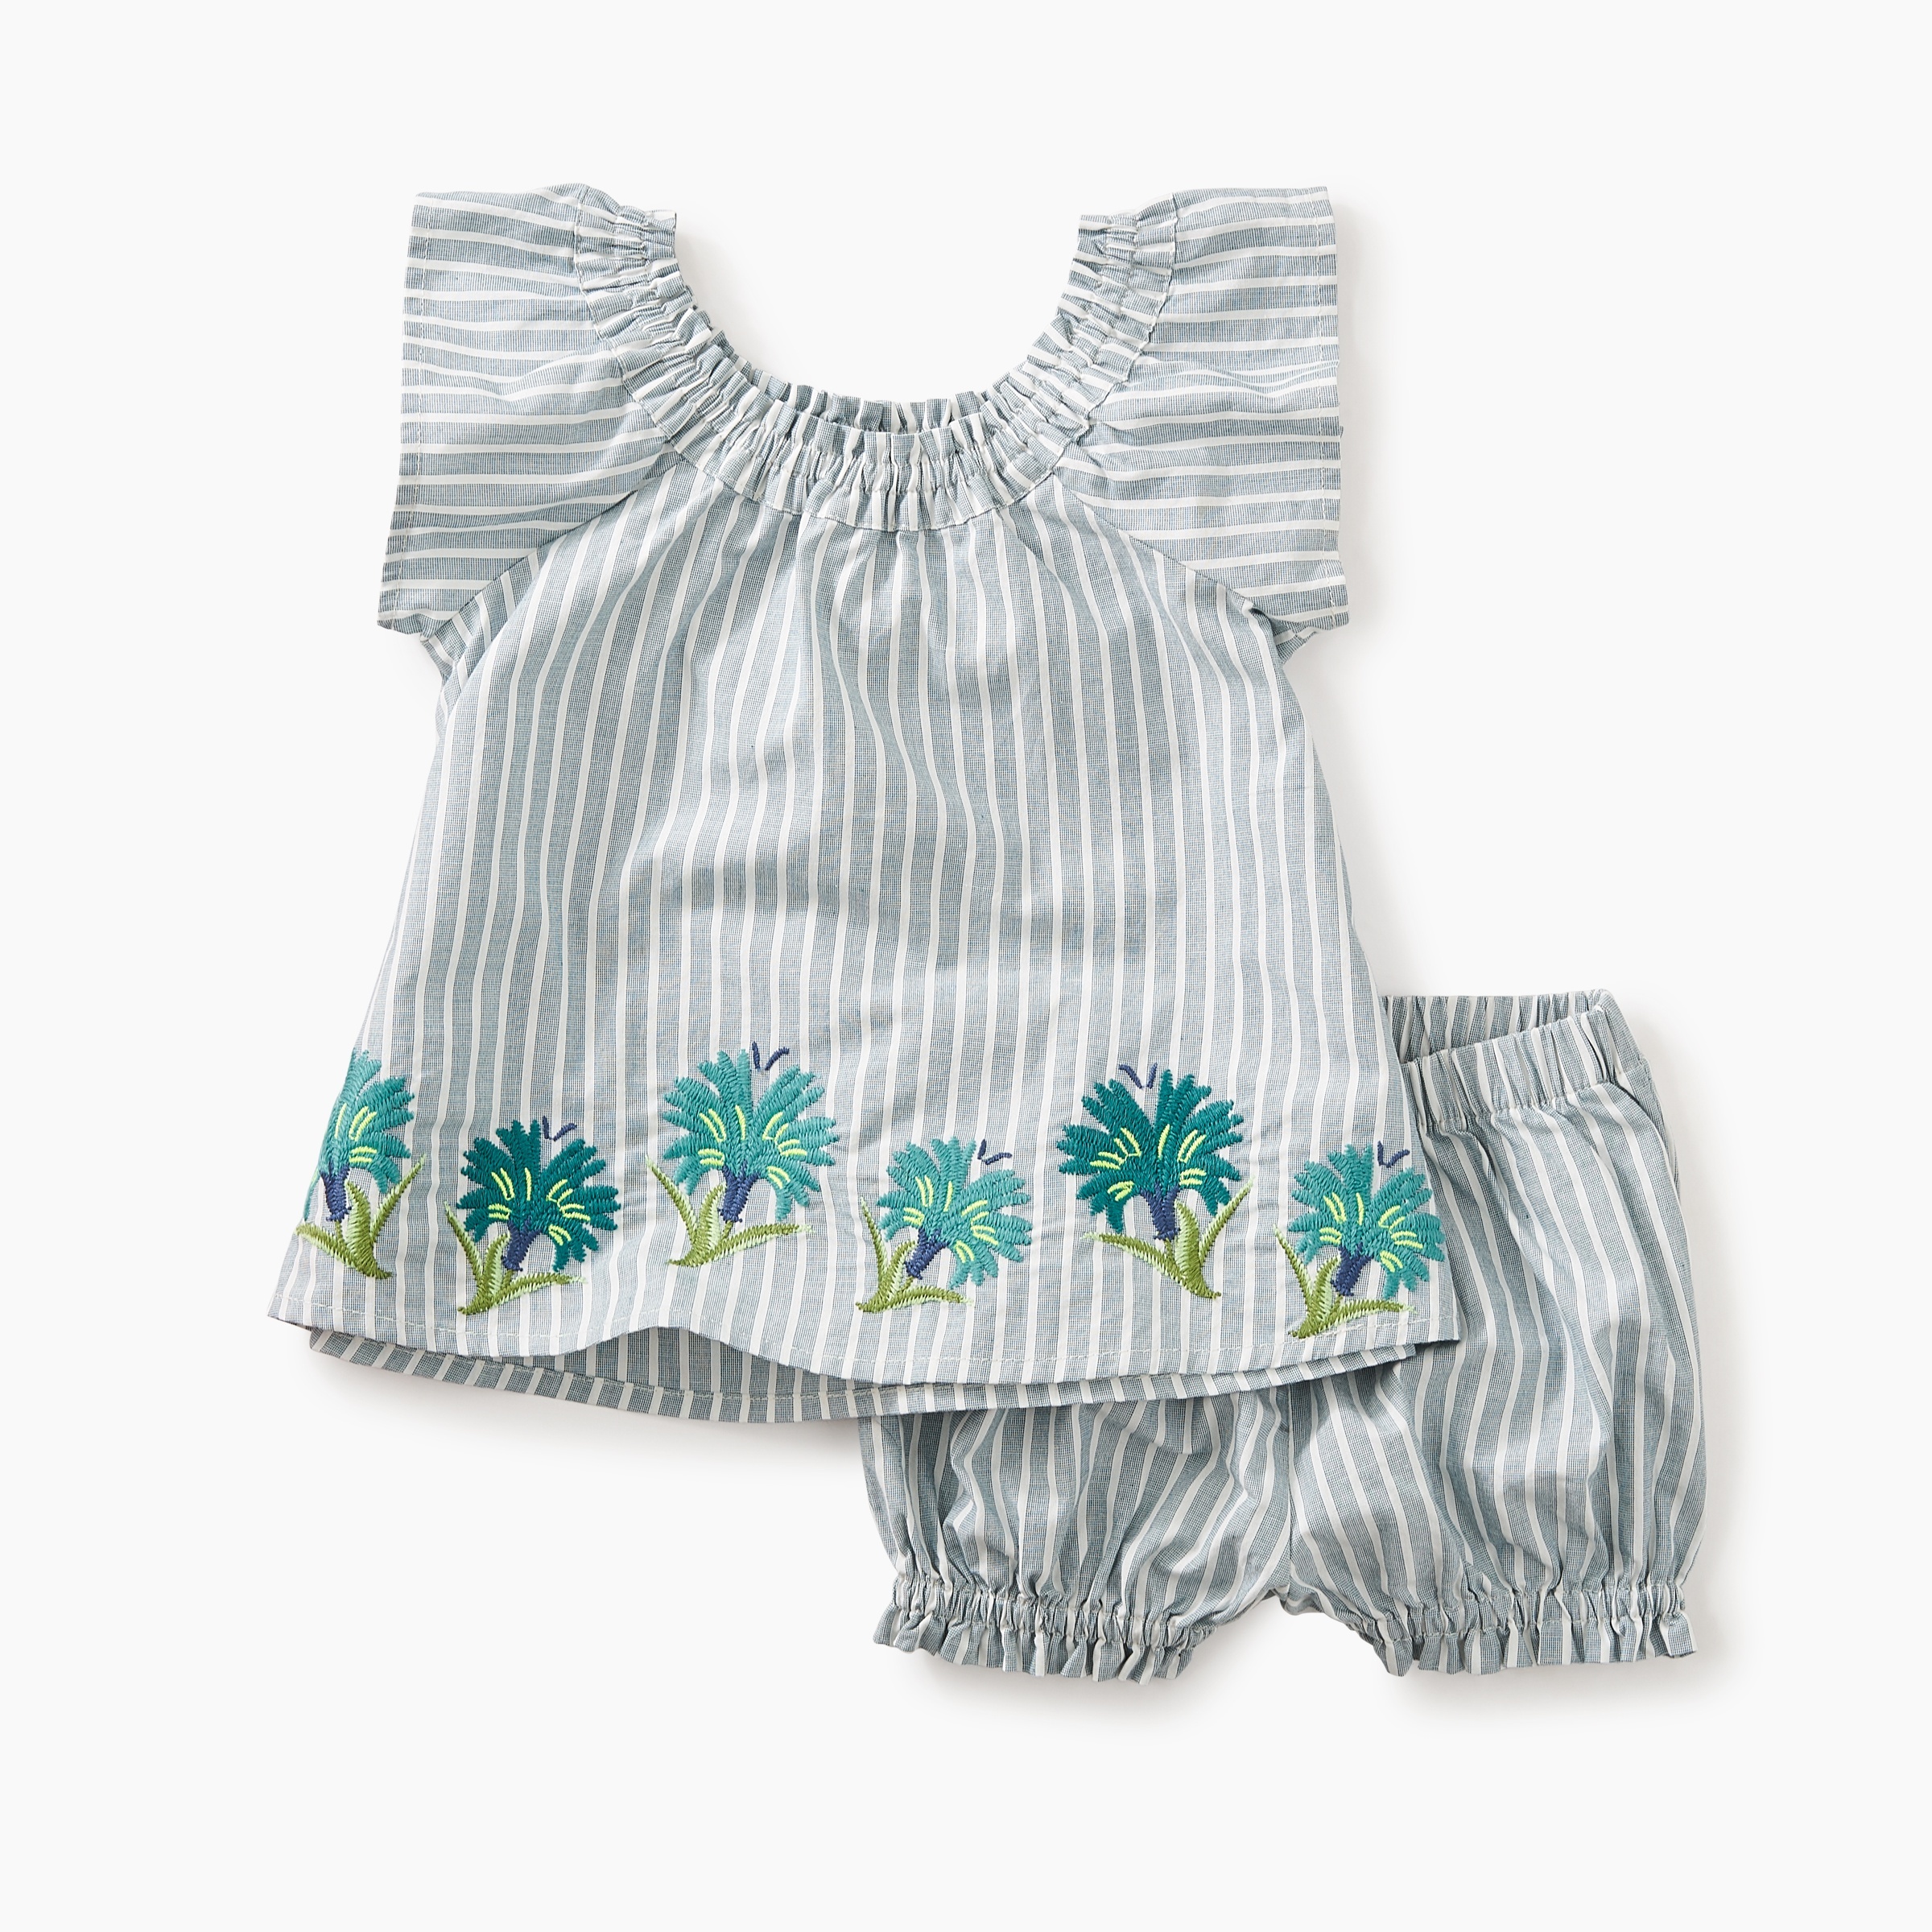 embroidered newborn outfits